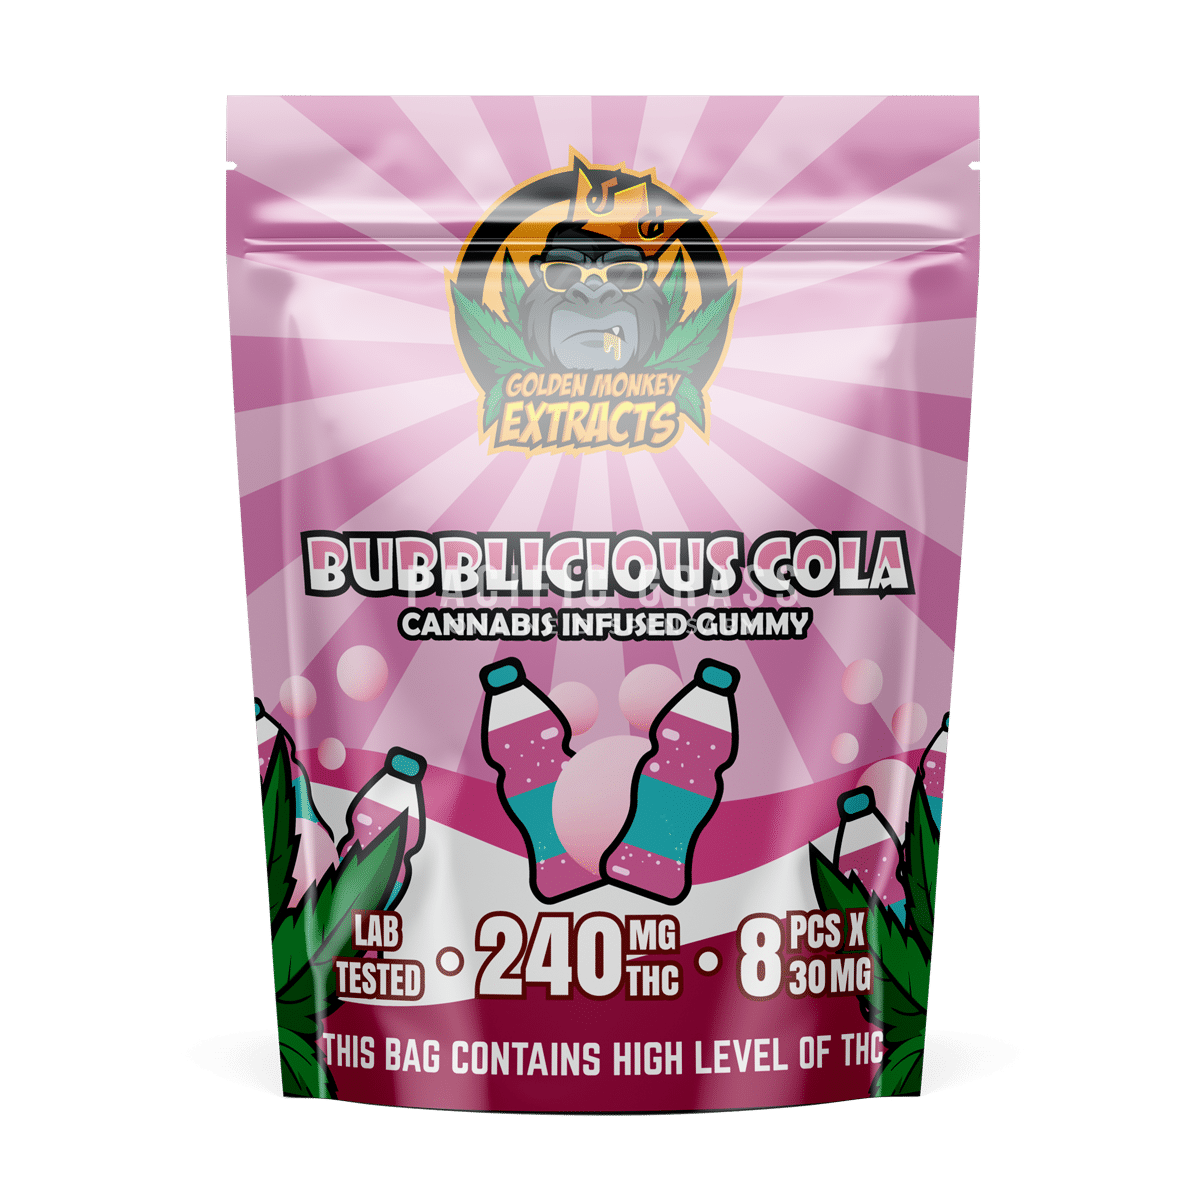 Golden Monkey Extracts 240mg Gummies – Bubblicious Cola